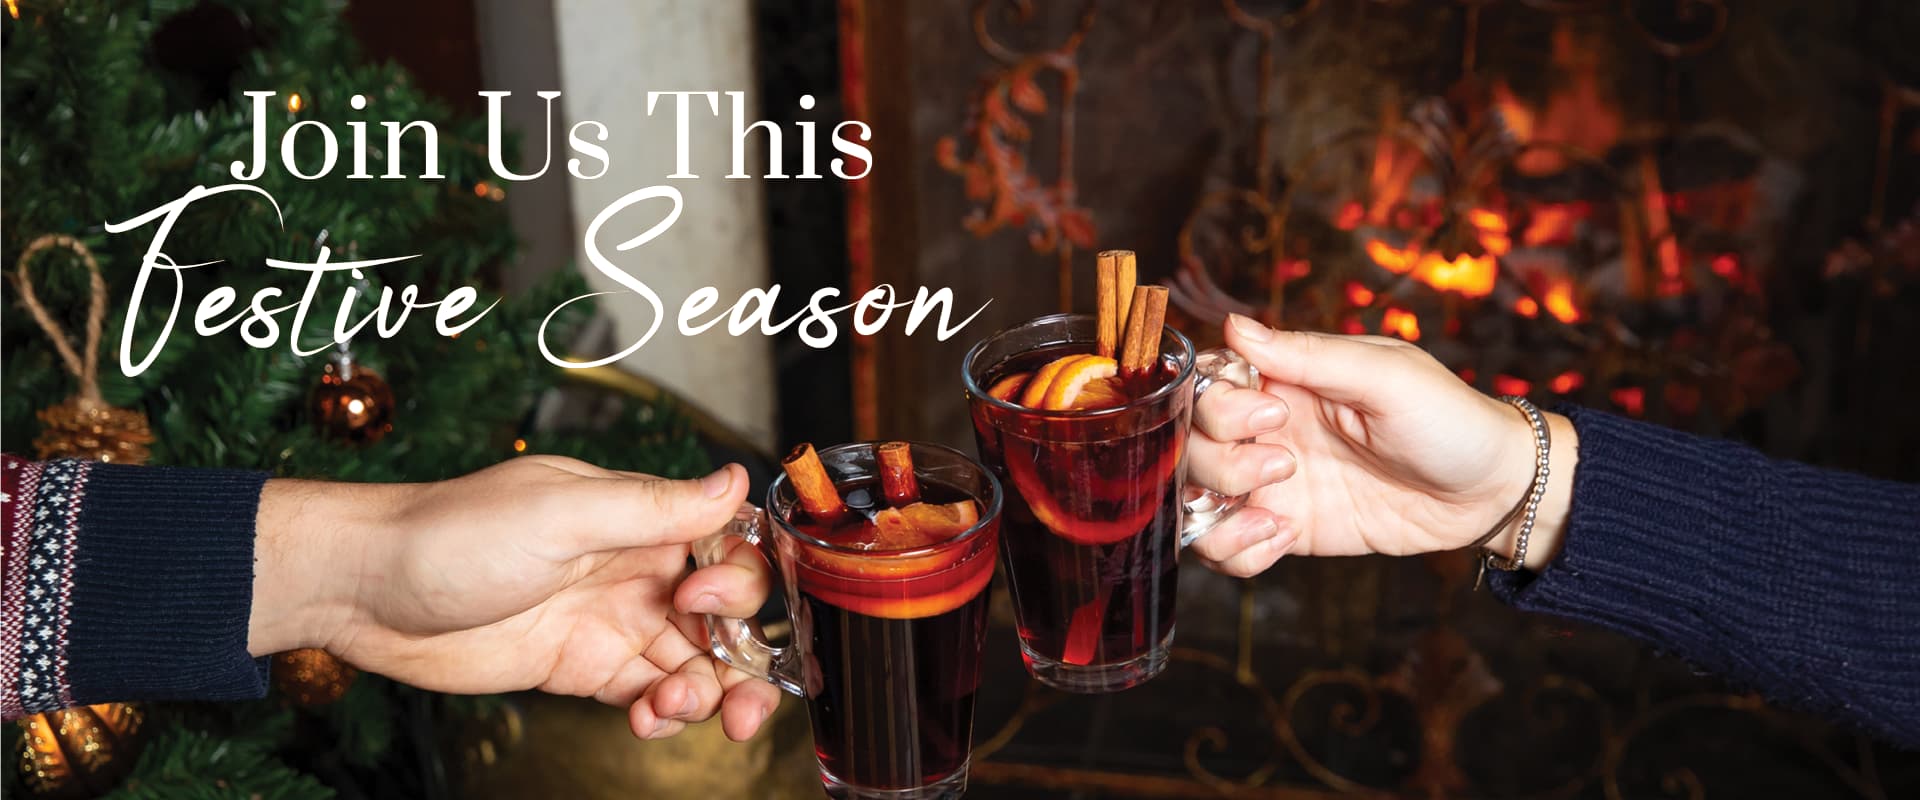 join us this festive season at Henry's Cardiff | Mulled Wine